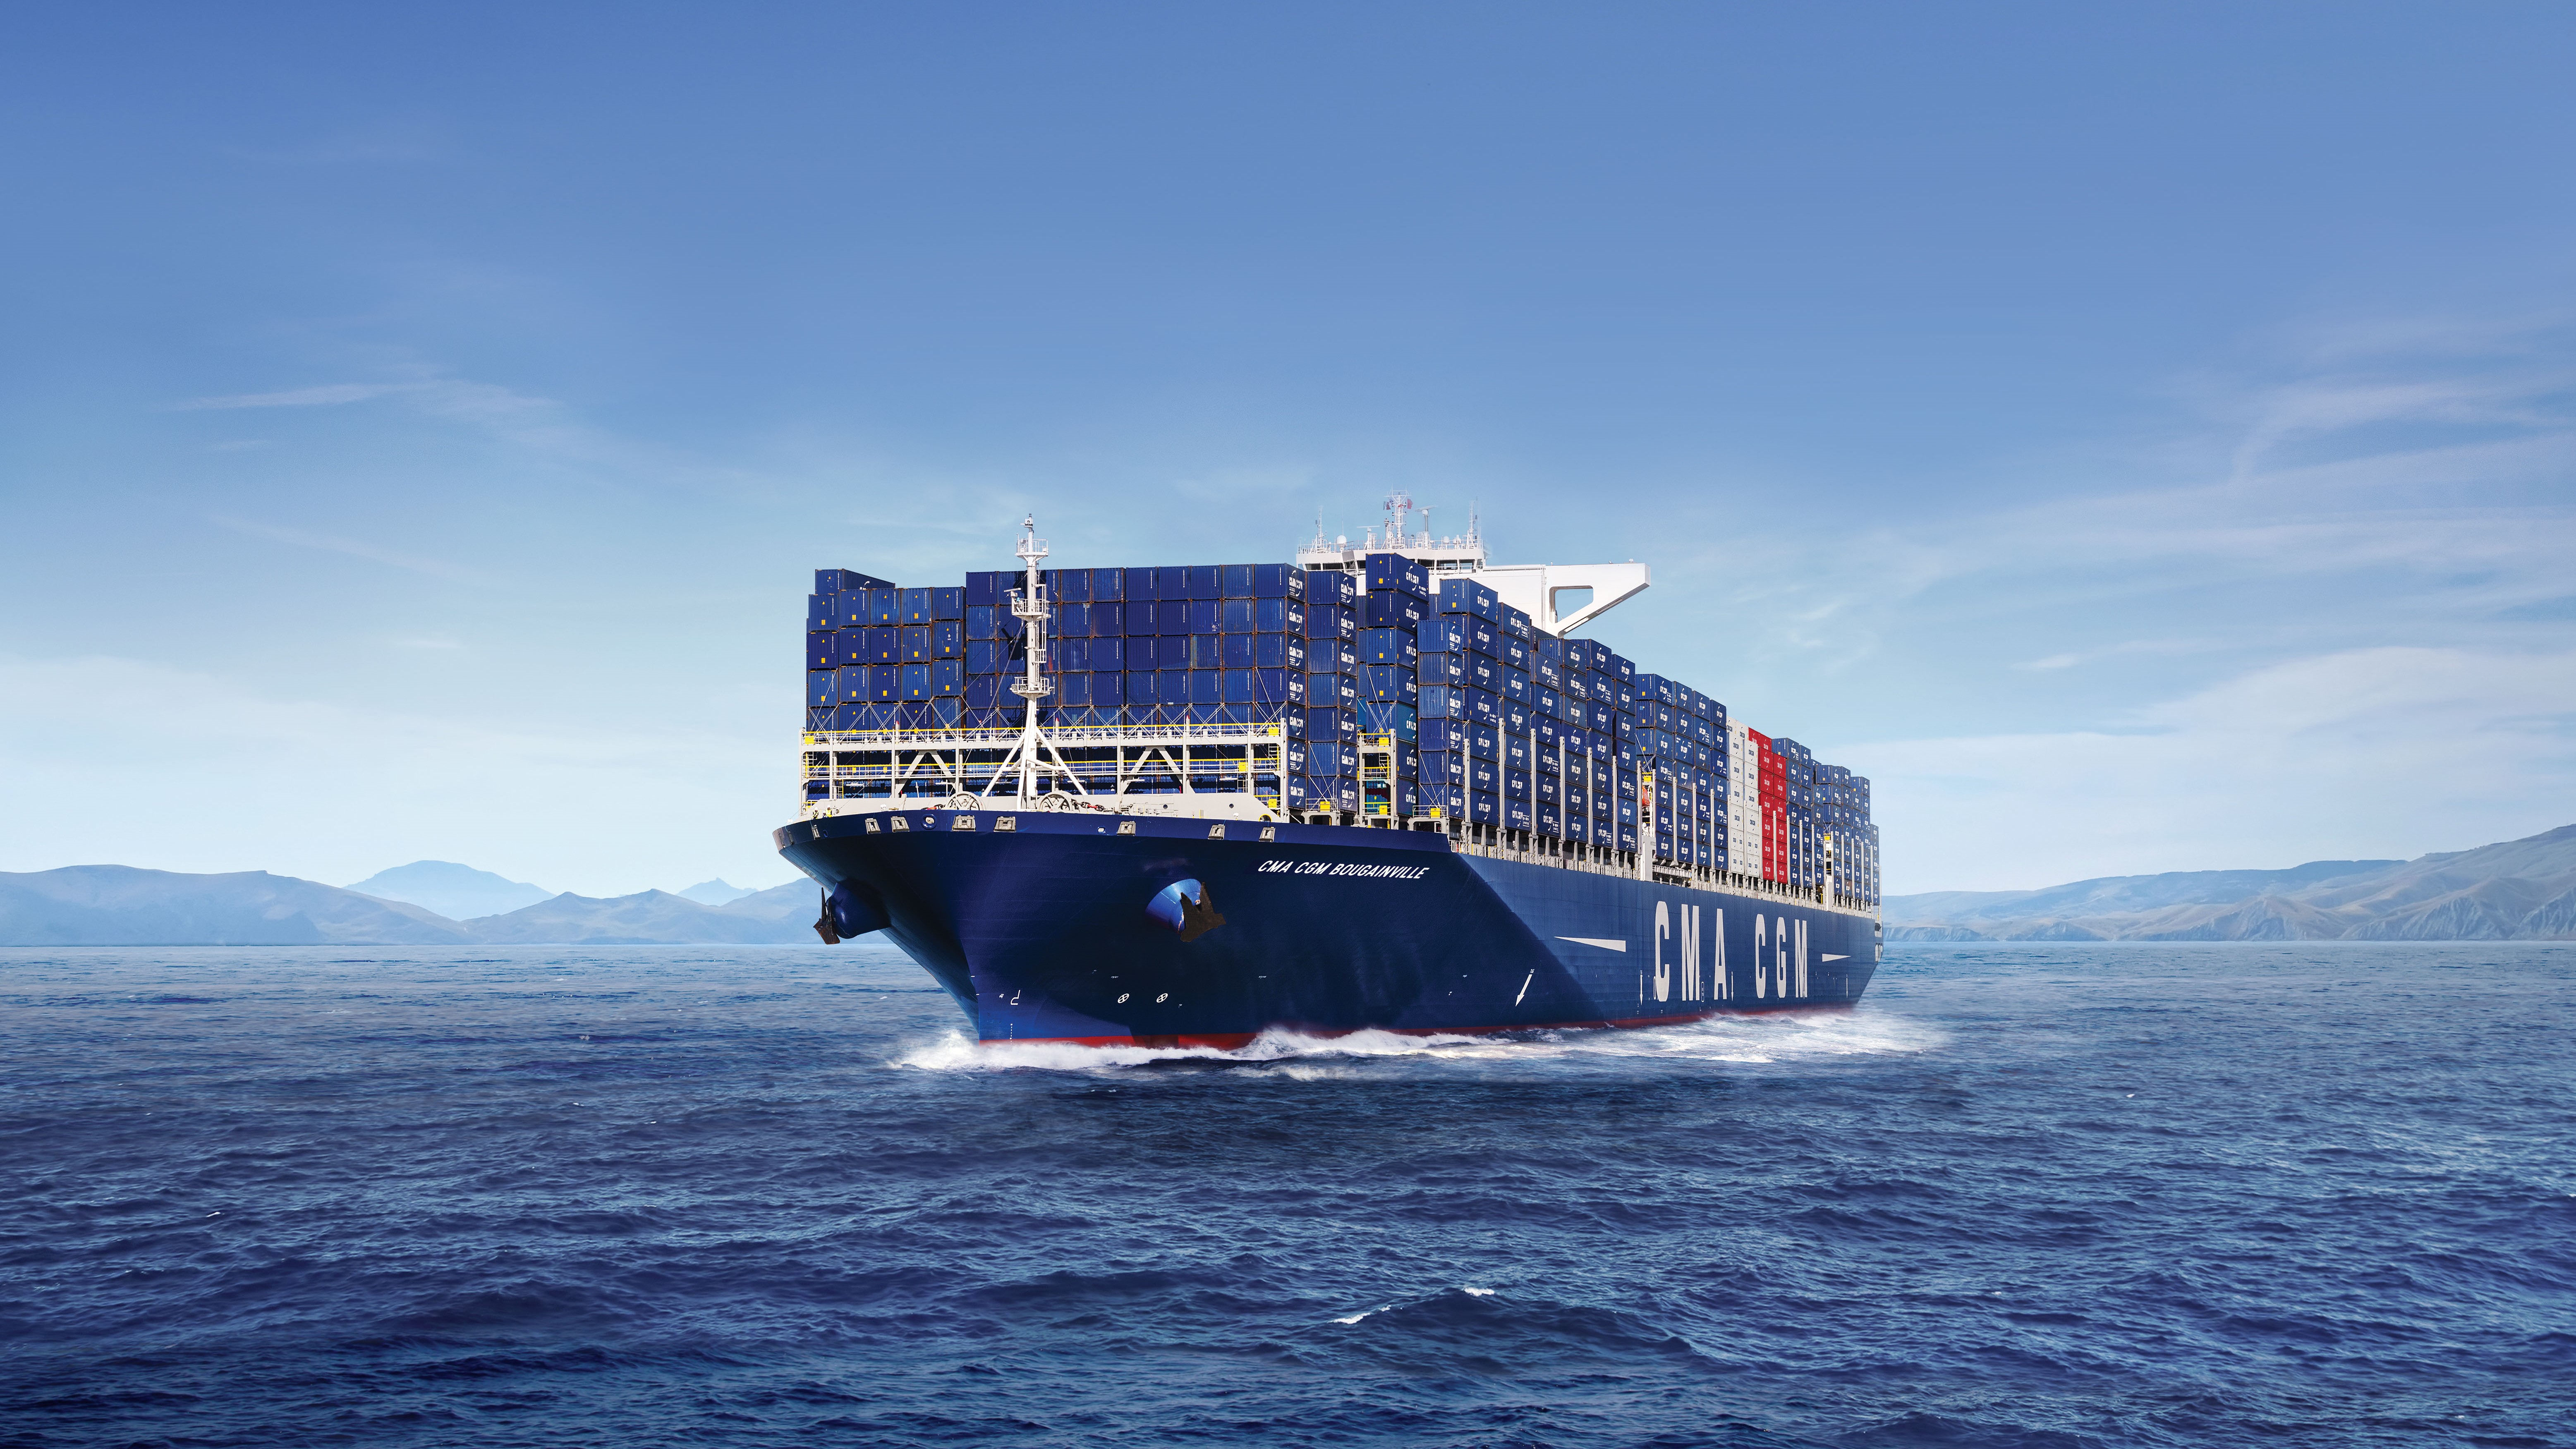 CMA CGM's LNG-powered ULCV launches 'new approach' in liner shipping 1